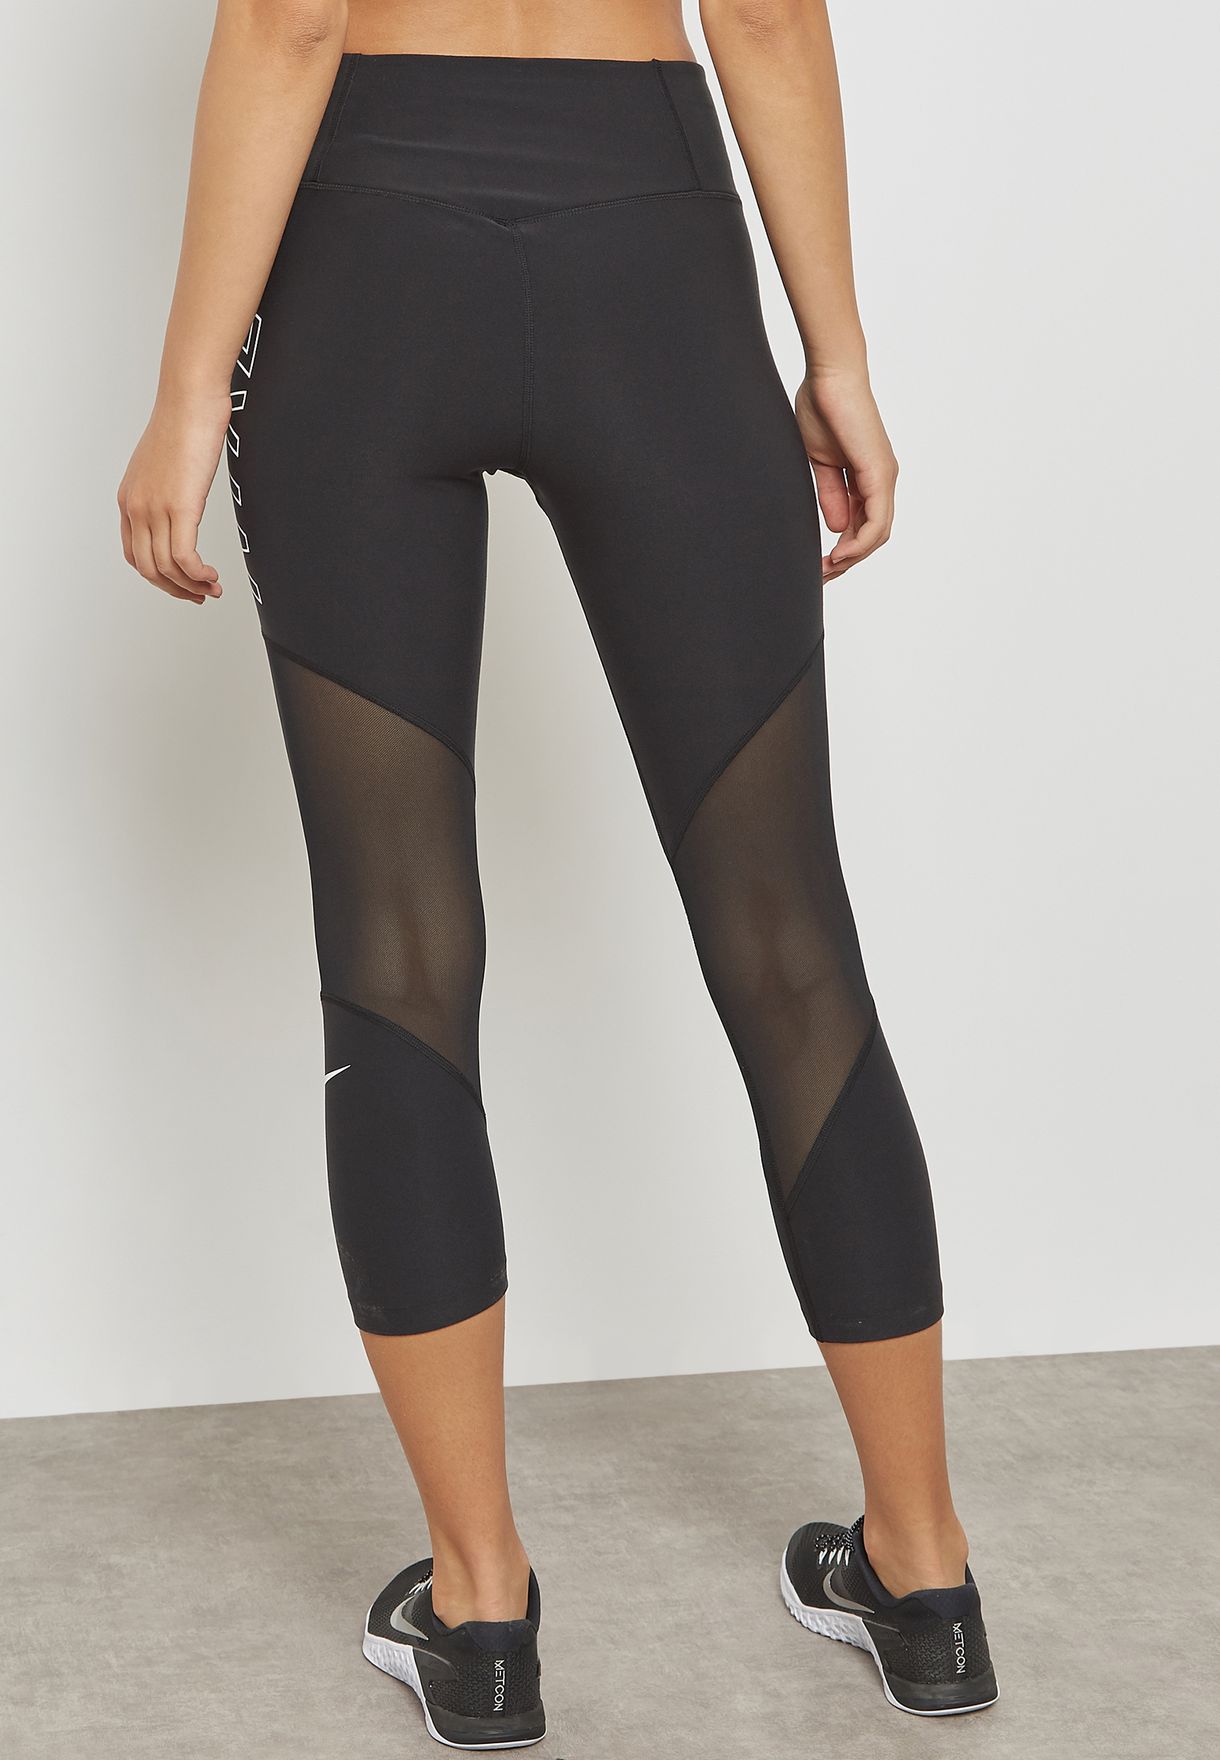 Activewear Leggings | Quality, Comfort & Style | Get KITTED